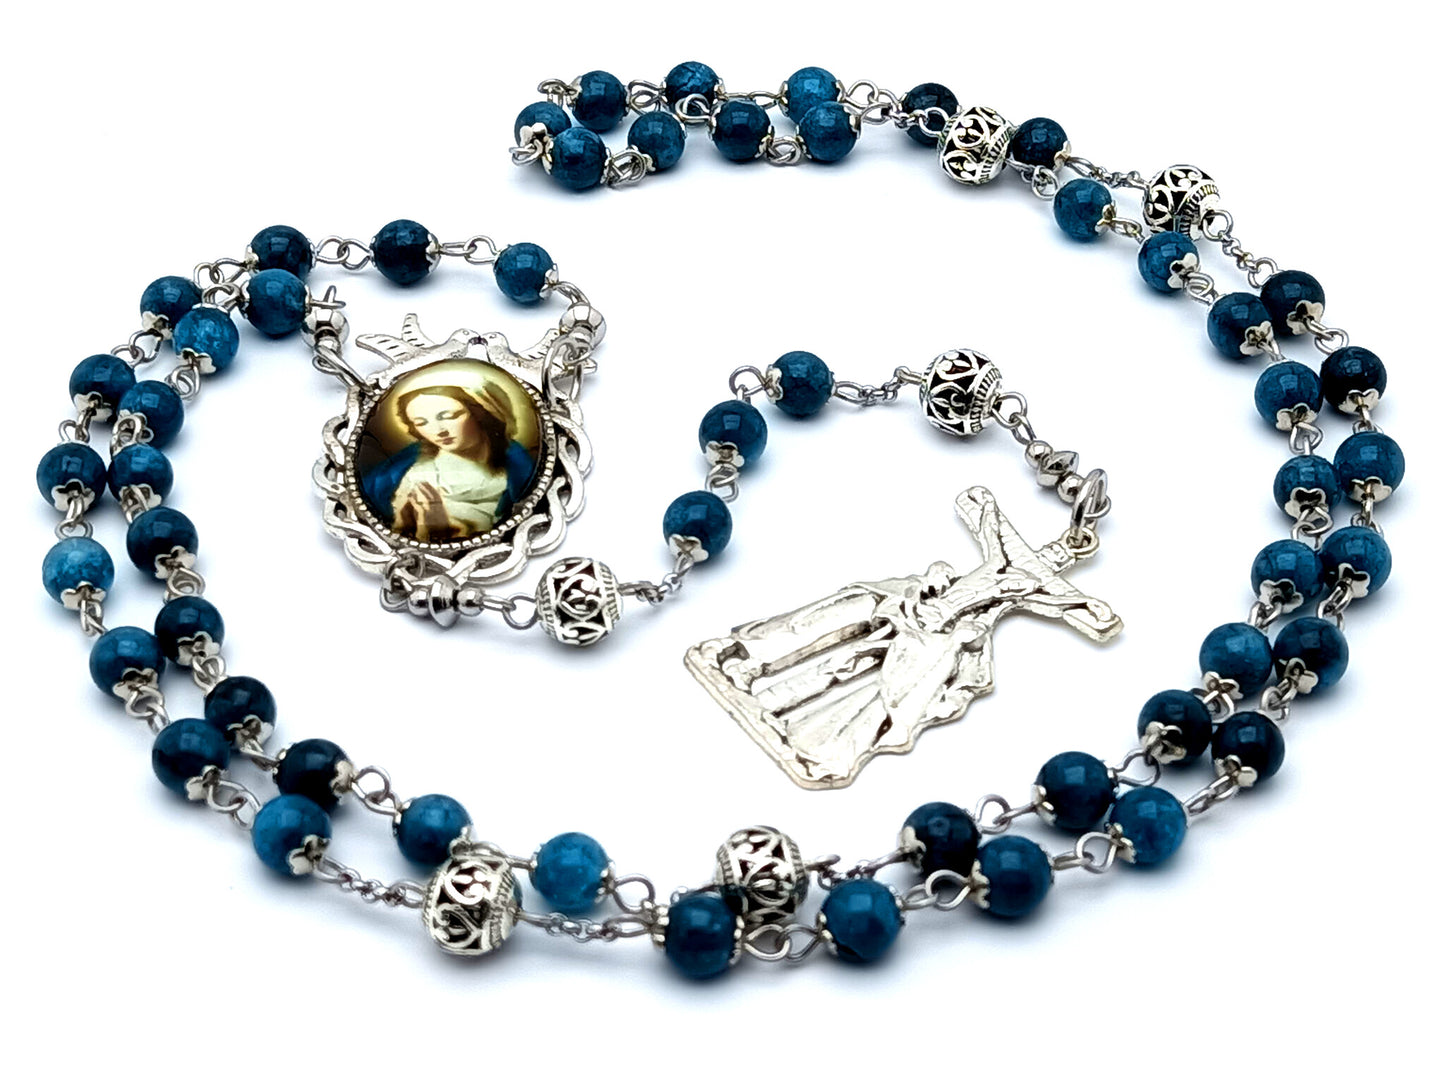 Our Lady of Sorrows unique rosary beads with apatite gemstone and Tibetan silver beads and Saint John and Mary at the foot of the Cross crucifix.